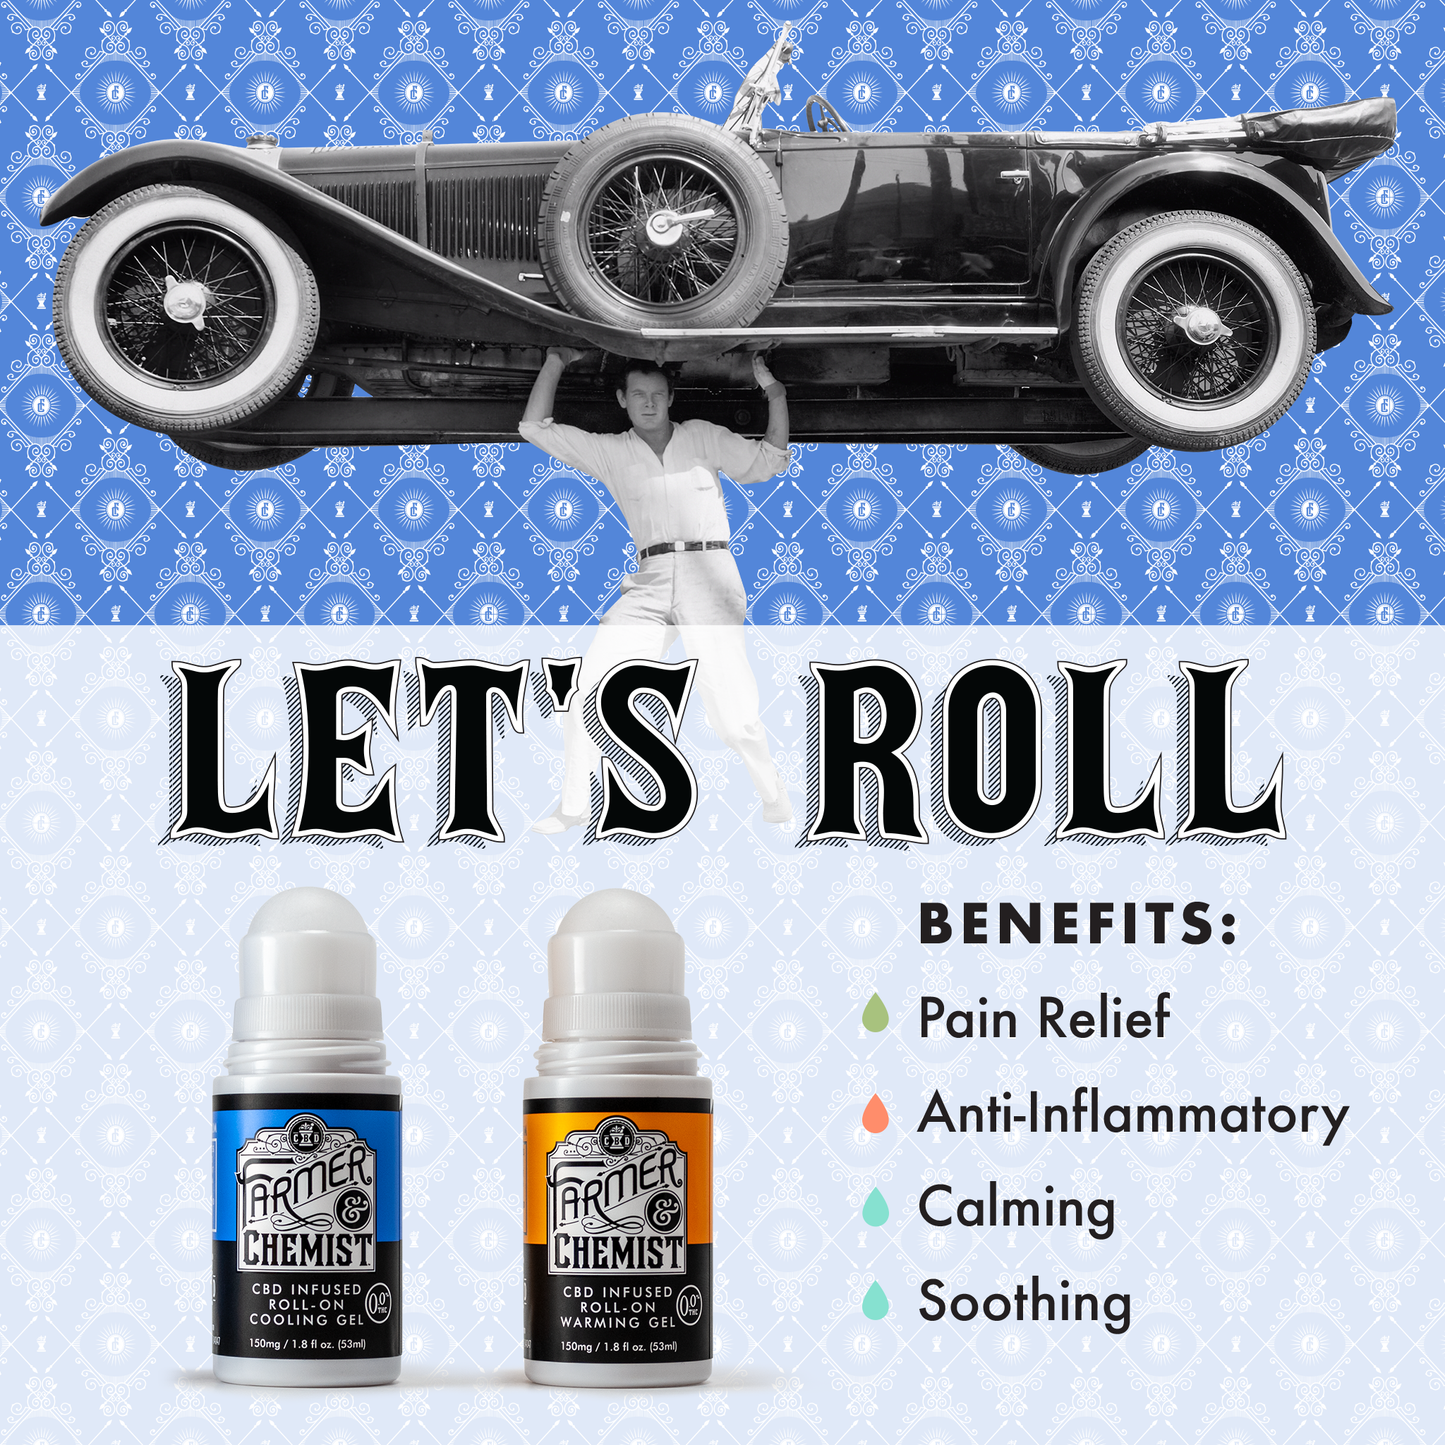 CHILL OUT - 150mg Roll-on Cooling Gel